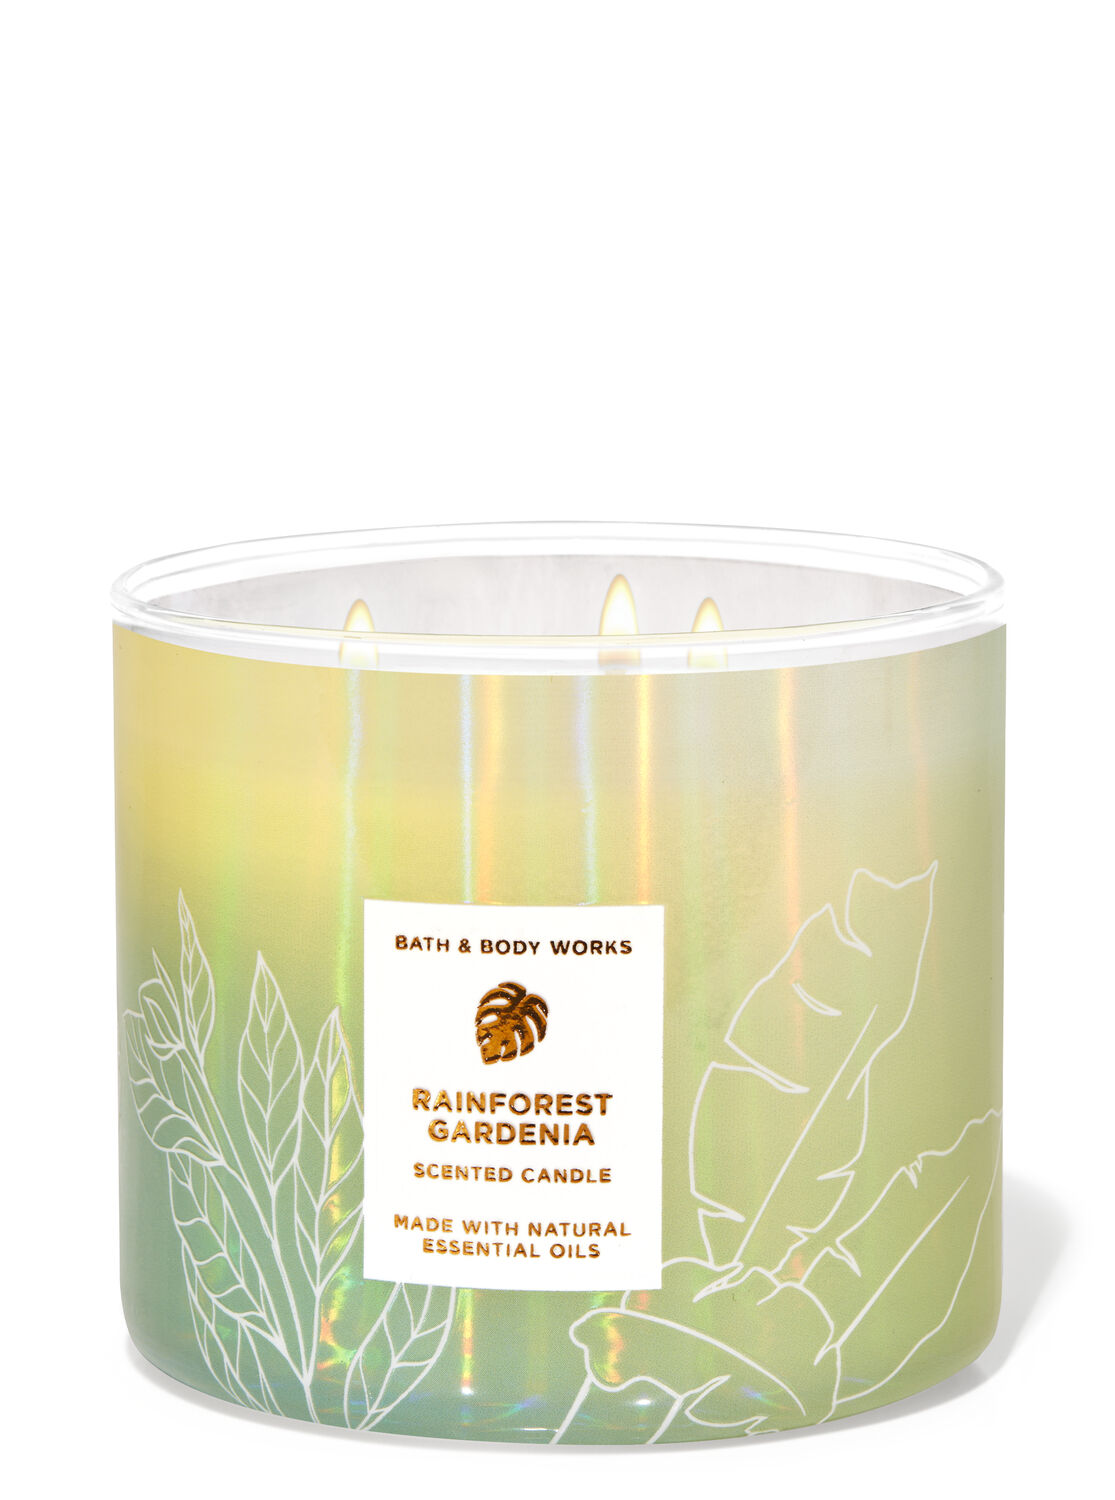 Bath & Body Works White Barn Rainforest Gardenia 3 Wick Large Scented Candle X 2 